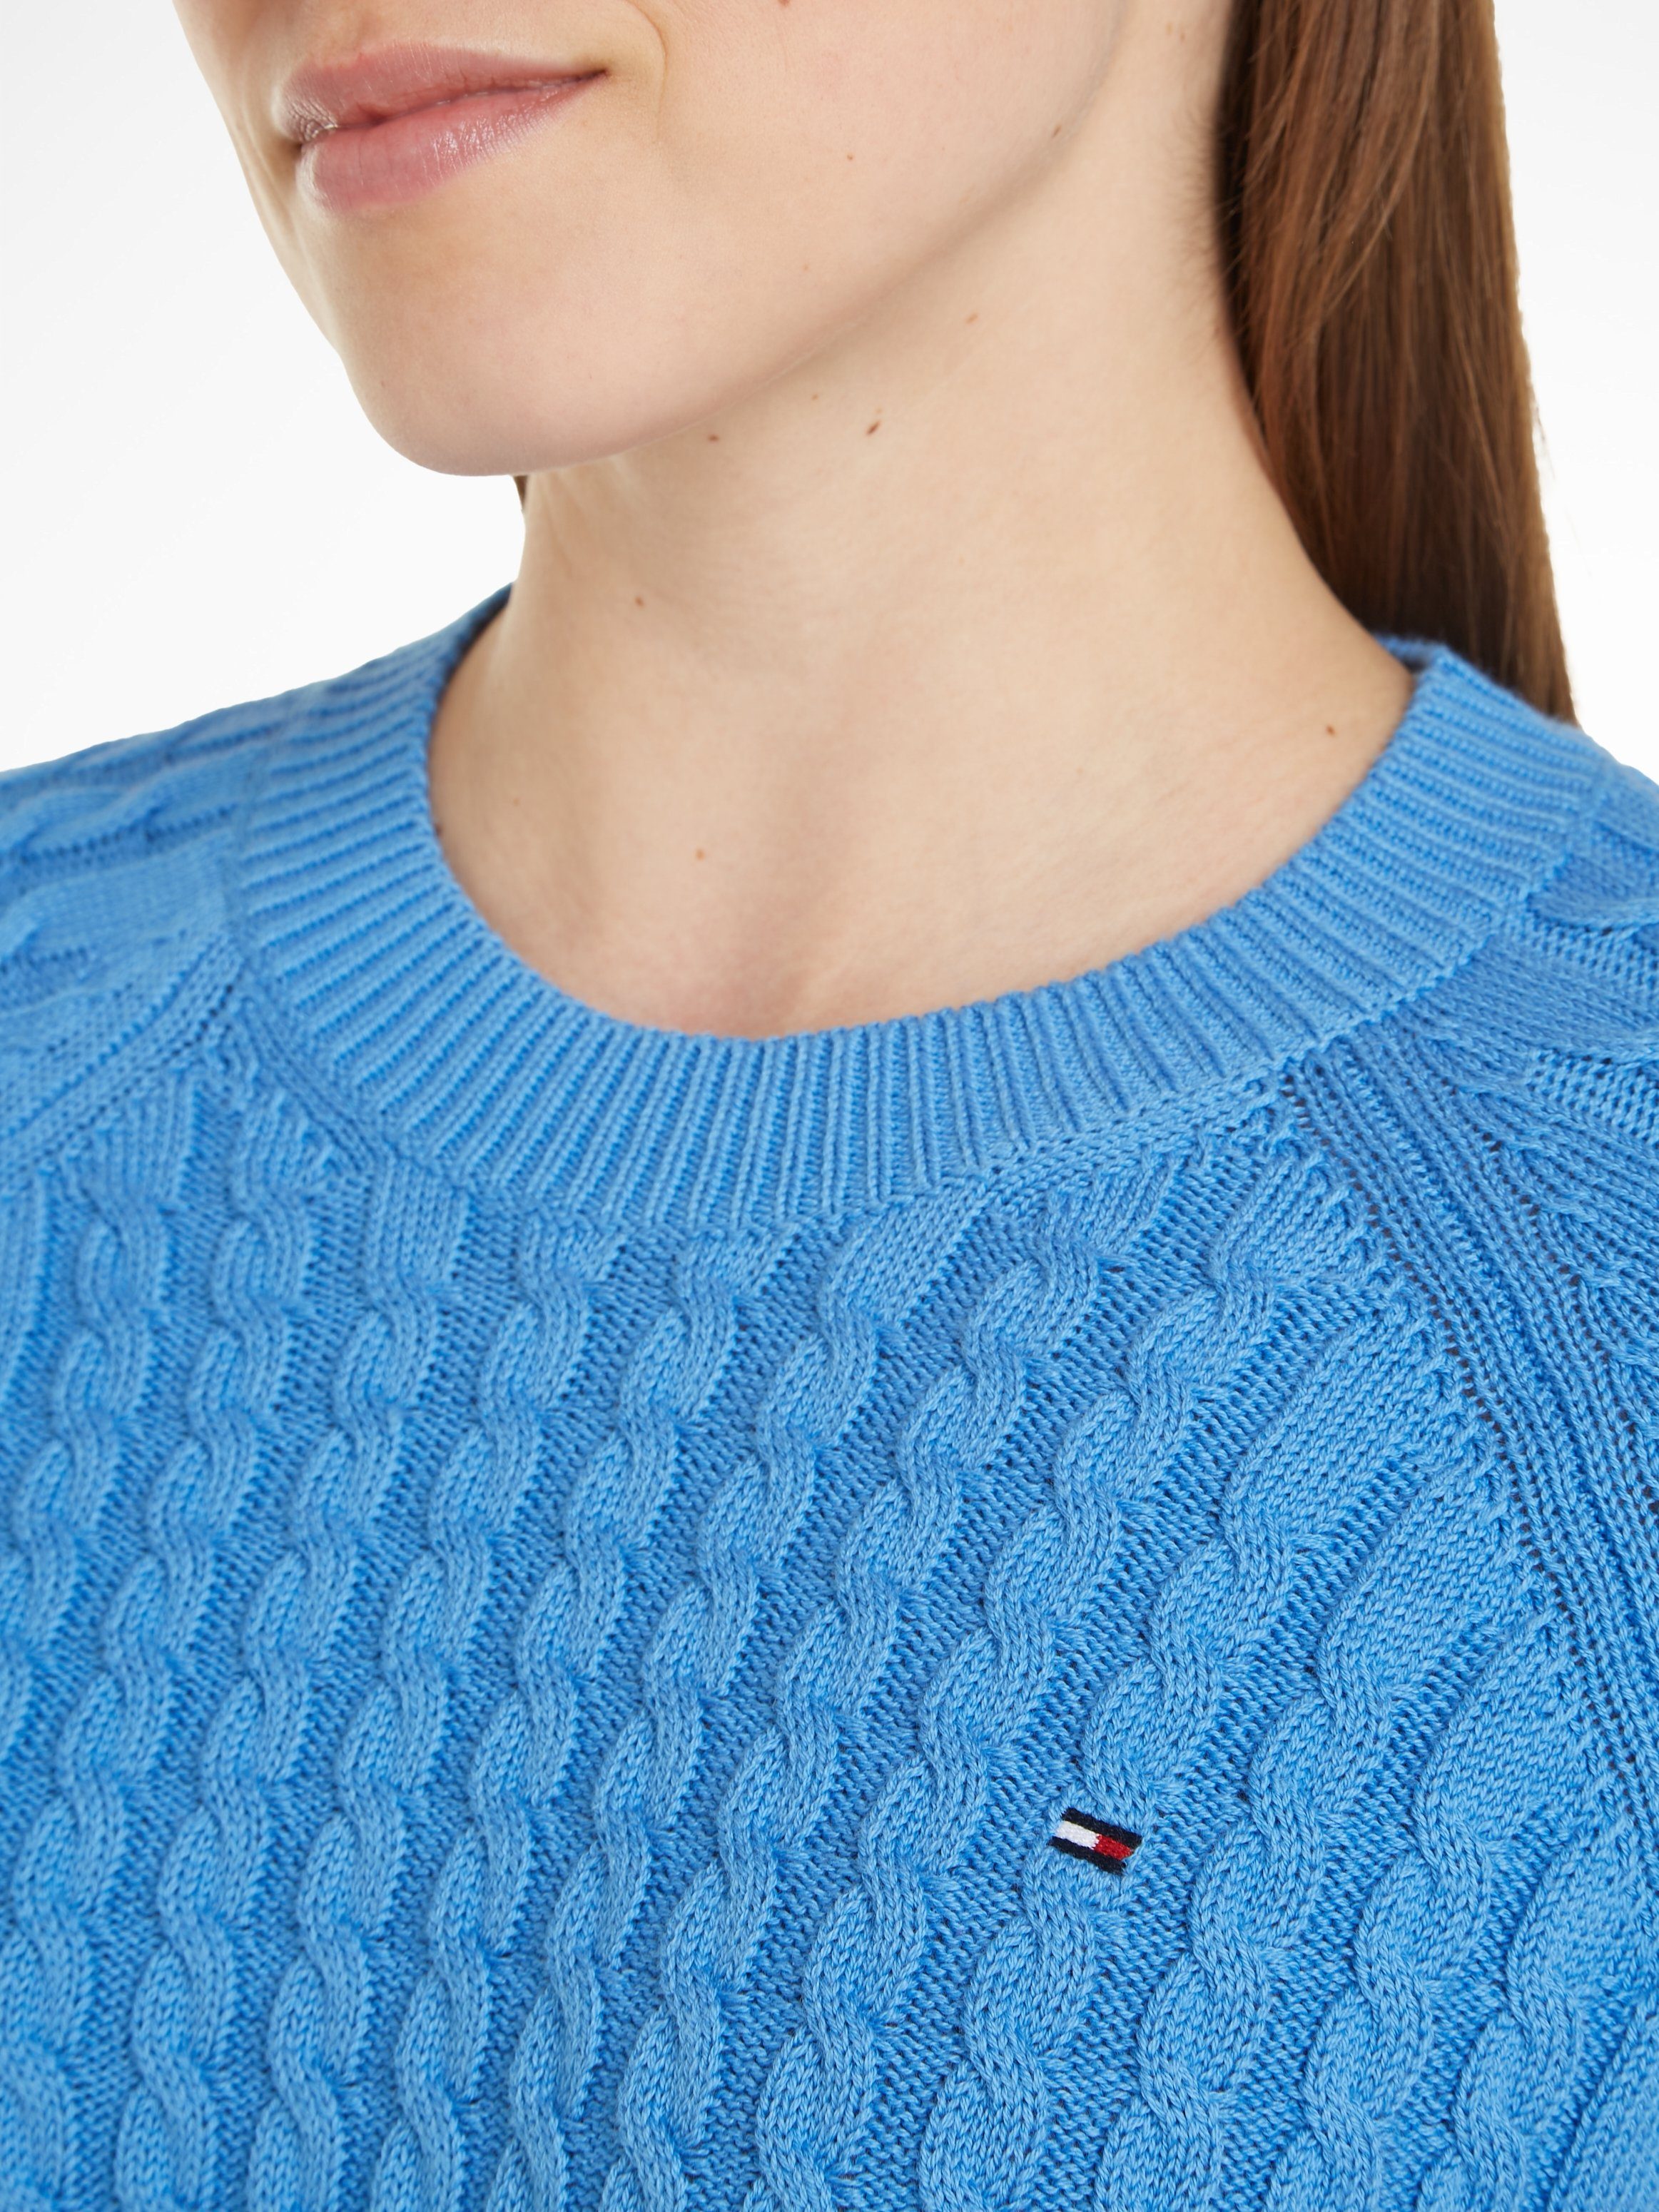 Tommy Hilfiger Trui met ronde hals CO CABLE C-NK SWEATER met all-over kabelpatroon